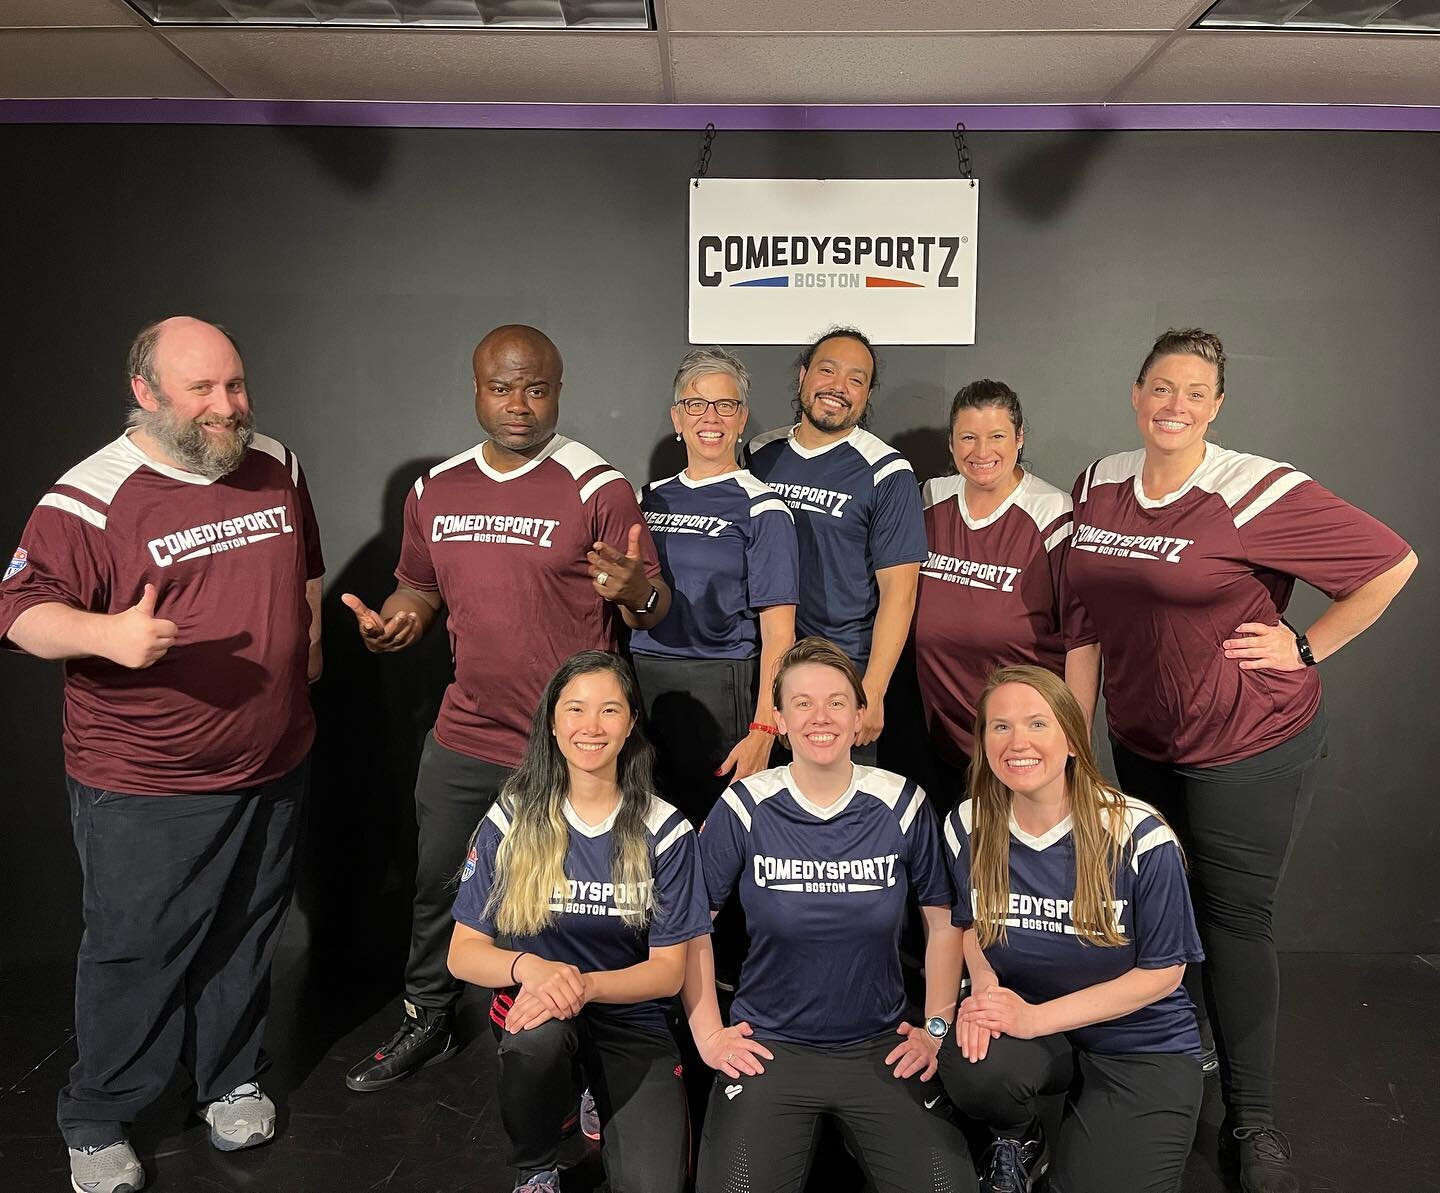 Players, are you ready?

About the 📸: New ComedySportz Players take the field for their first match post training 💙❤️

#ComedySportz #ComedySportzBoston #CSzBoston #CSzWorldwide

#Improv #Improvisation #Comedy #Boston #BostonComedy

#ROSlove #Rosli